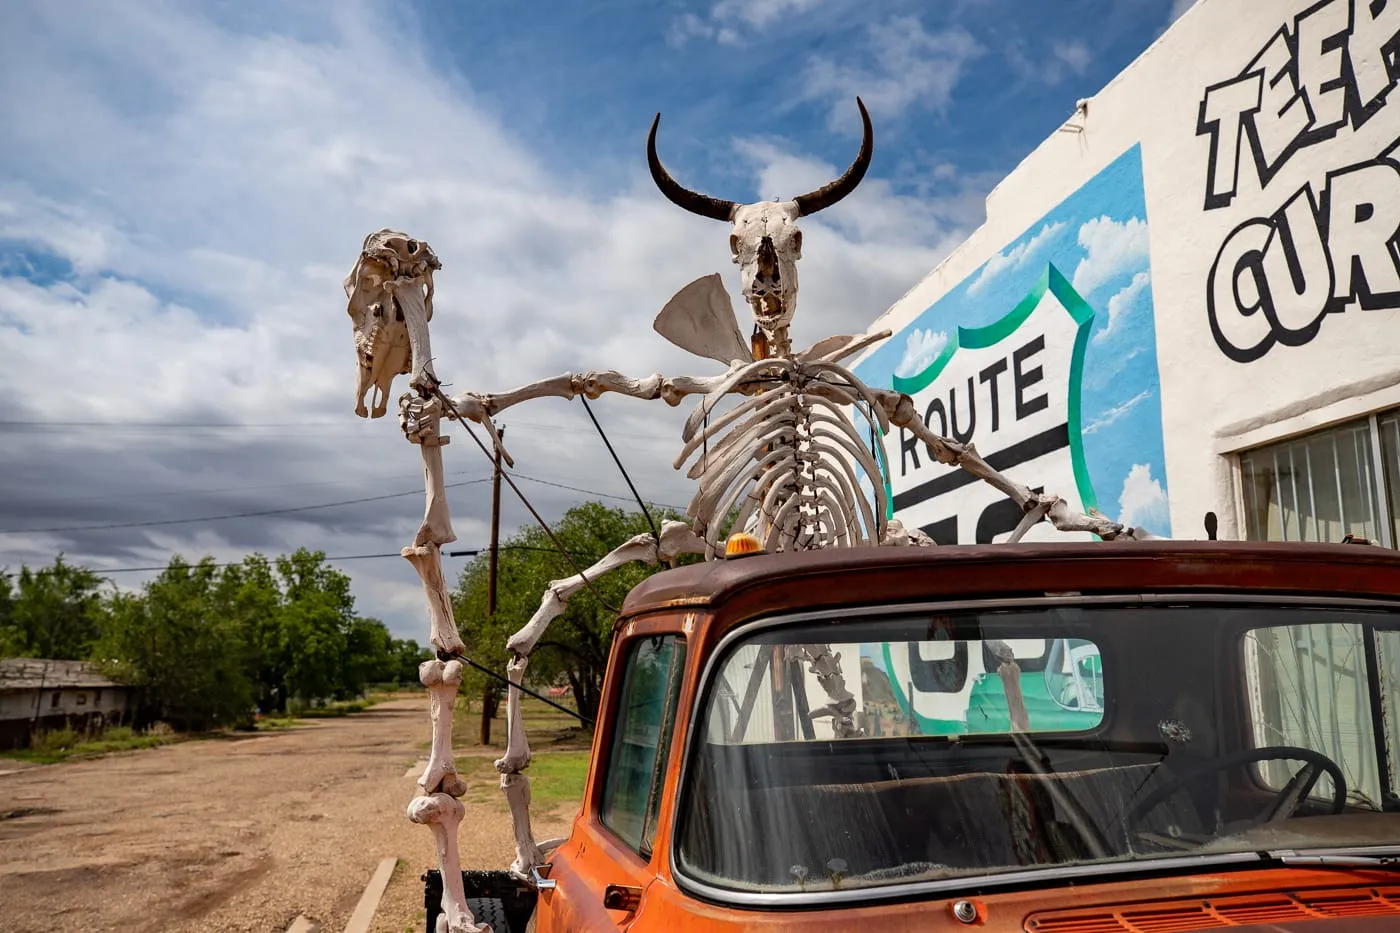 Skeleton riding a car at Tee Pee Curios in Tucumcari, New Mexico - Route 66 Roadside Attraction